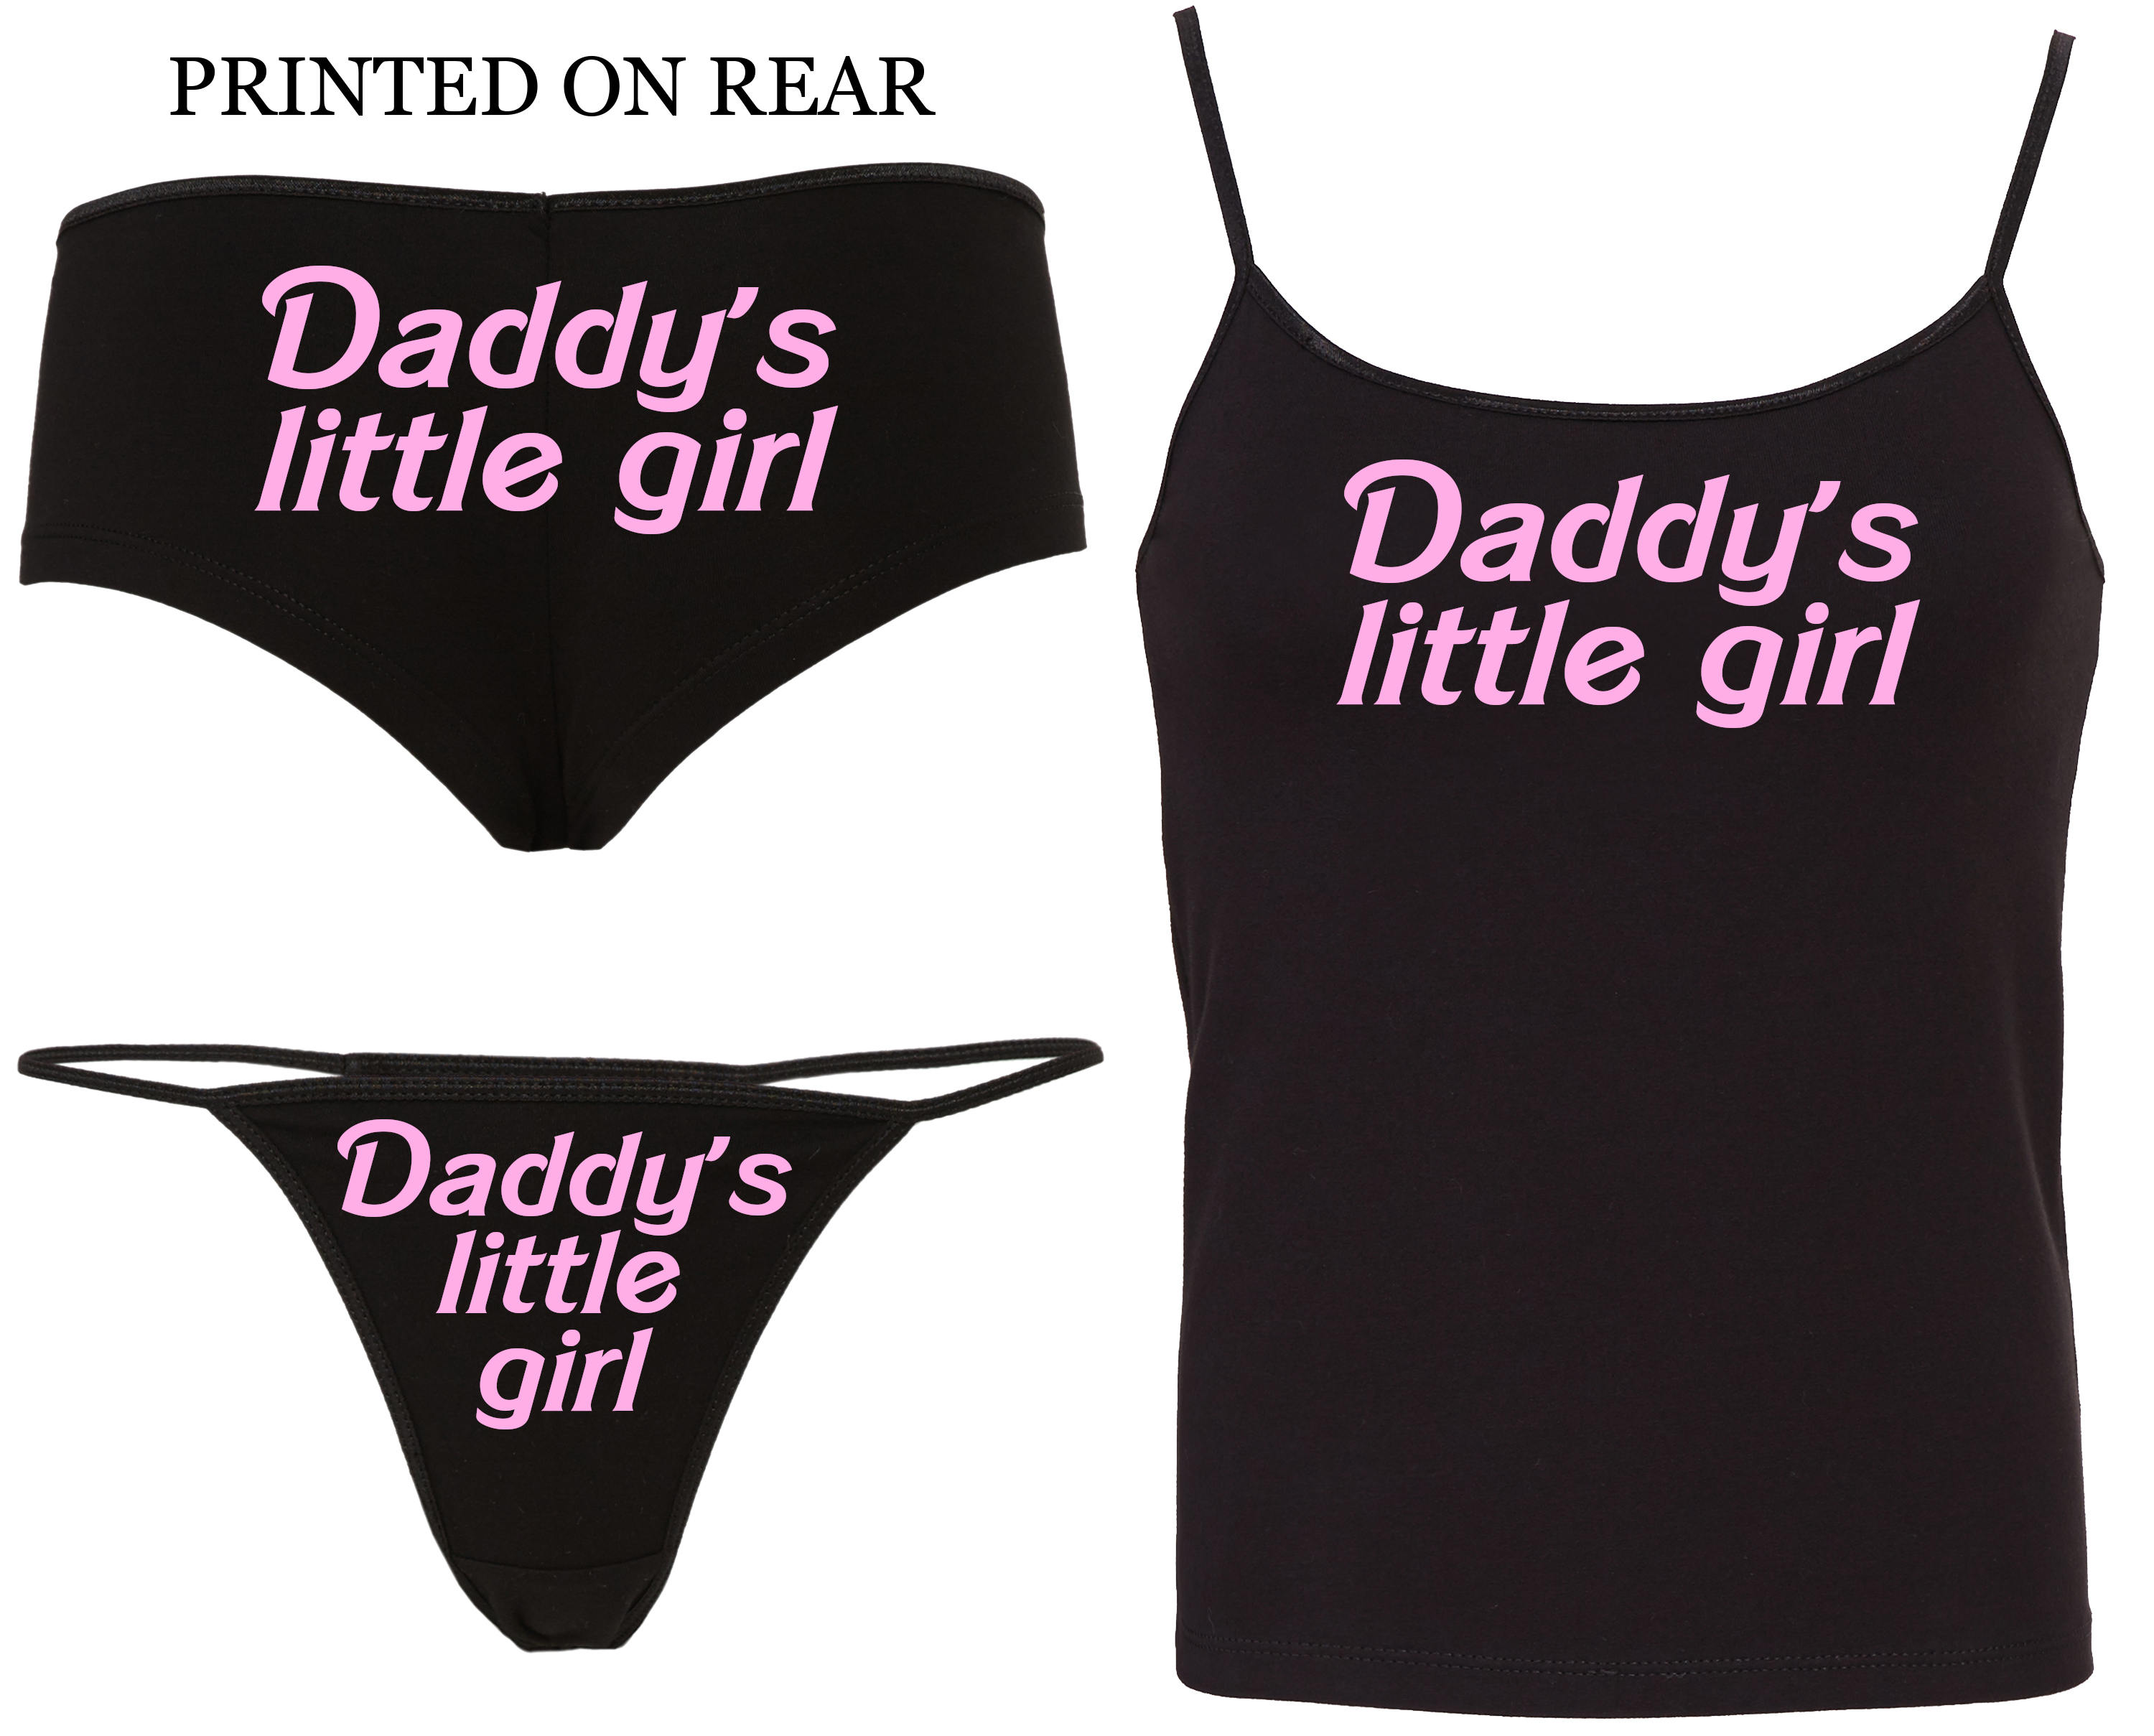 DADDYS LITTLE GIRL Camisole Set 15 Color Choices Matching Boy Short or Thong  Panties Boyshort Hen Party Bachelorette Bdsm Ddlg Cglg Baby -  Norway